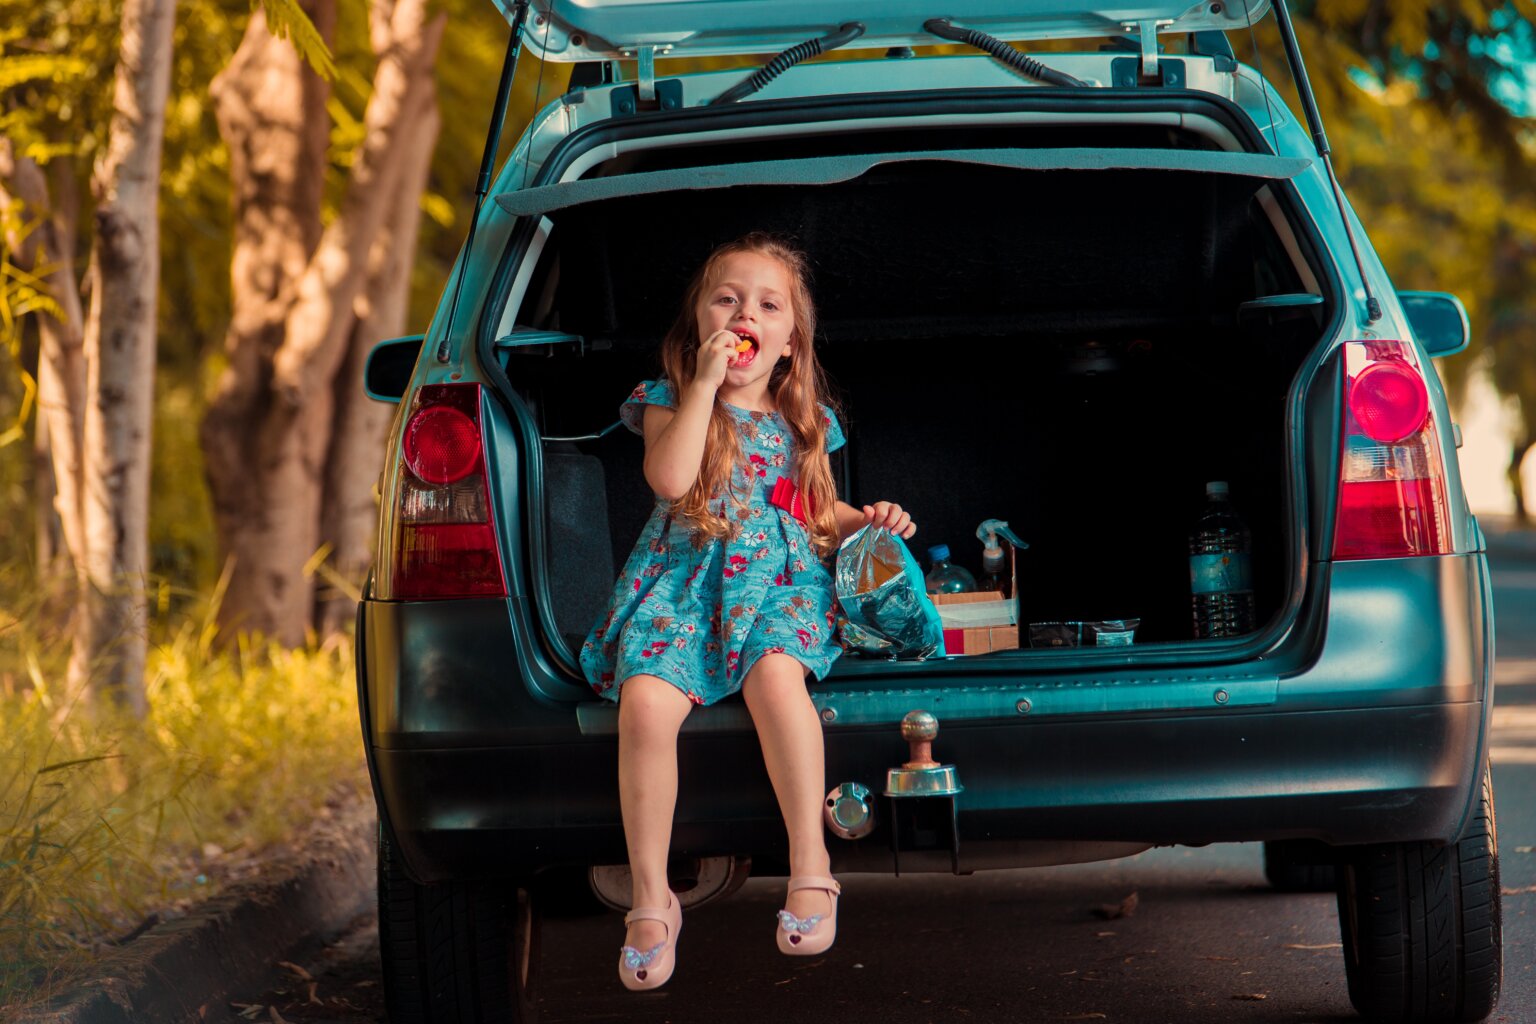 A girl sitting in the trunk of a car while on a road trip and eating snacks.